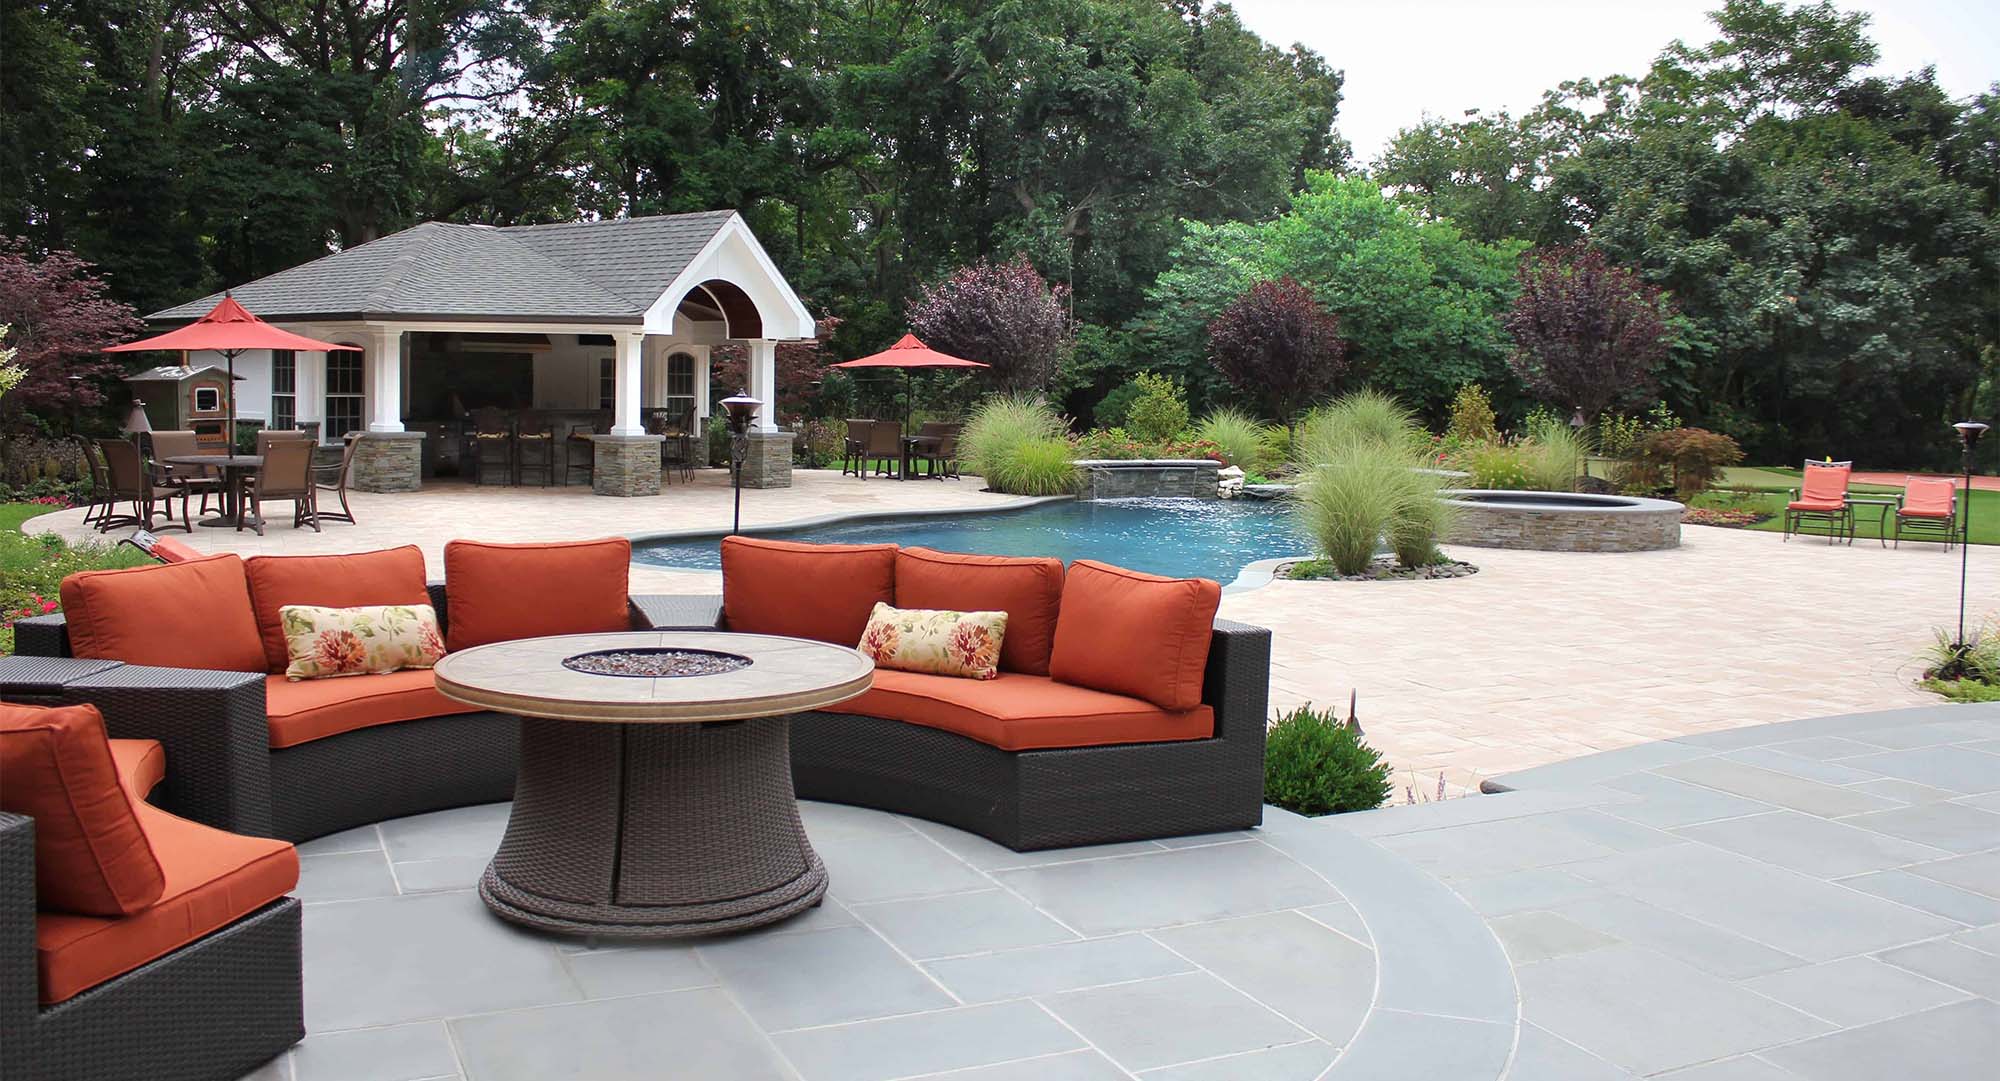 pool house designs blue stone patio wicker with red cushions real stone pillars Azek trim